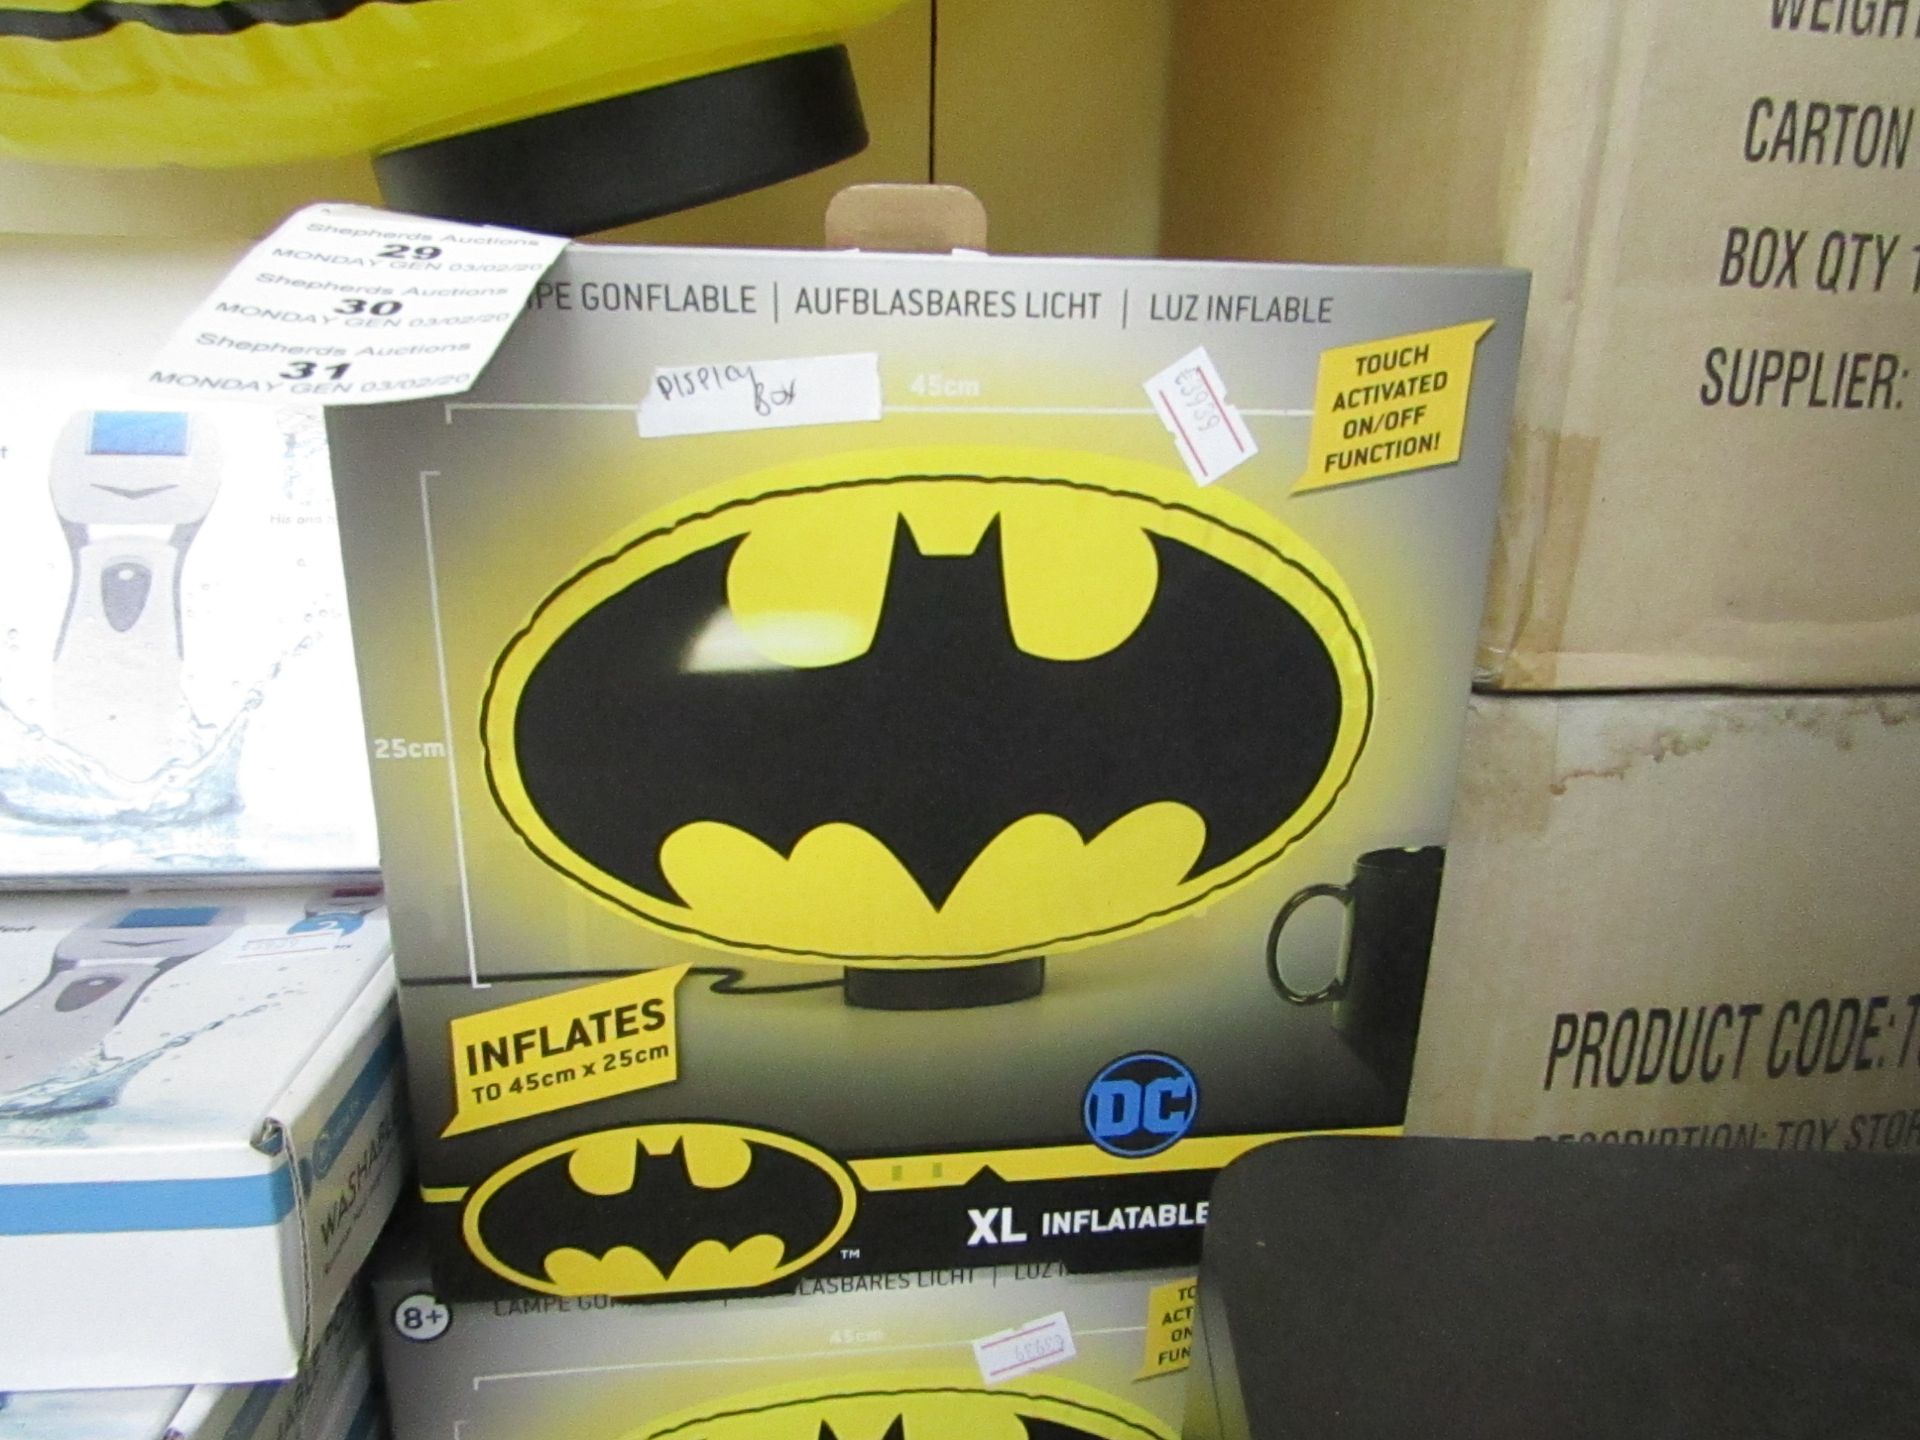 Batman XL Inflatable Light. Inflates to 45cm x 25cm.New & Boxed